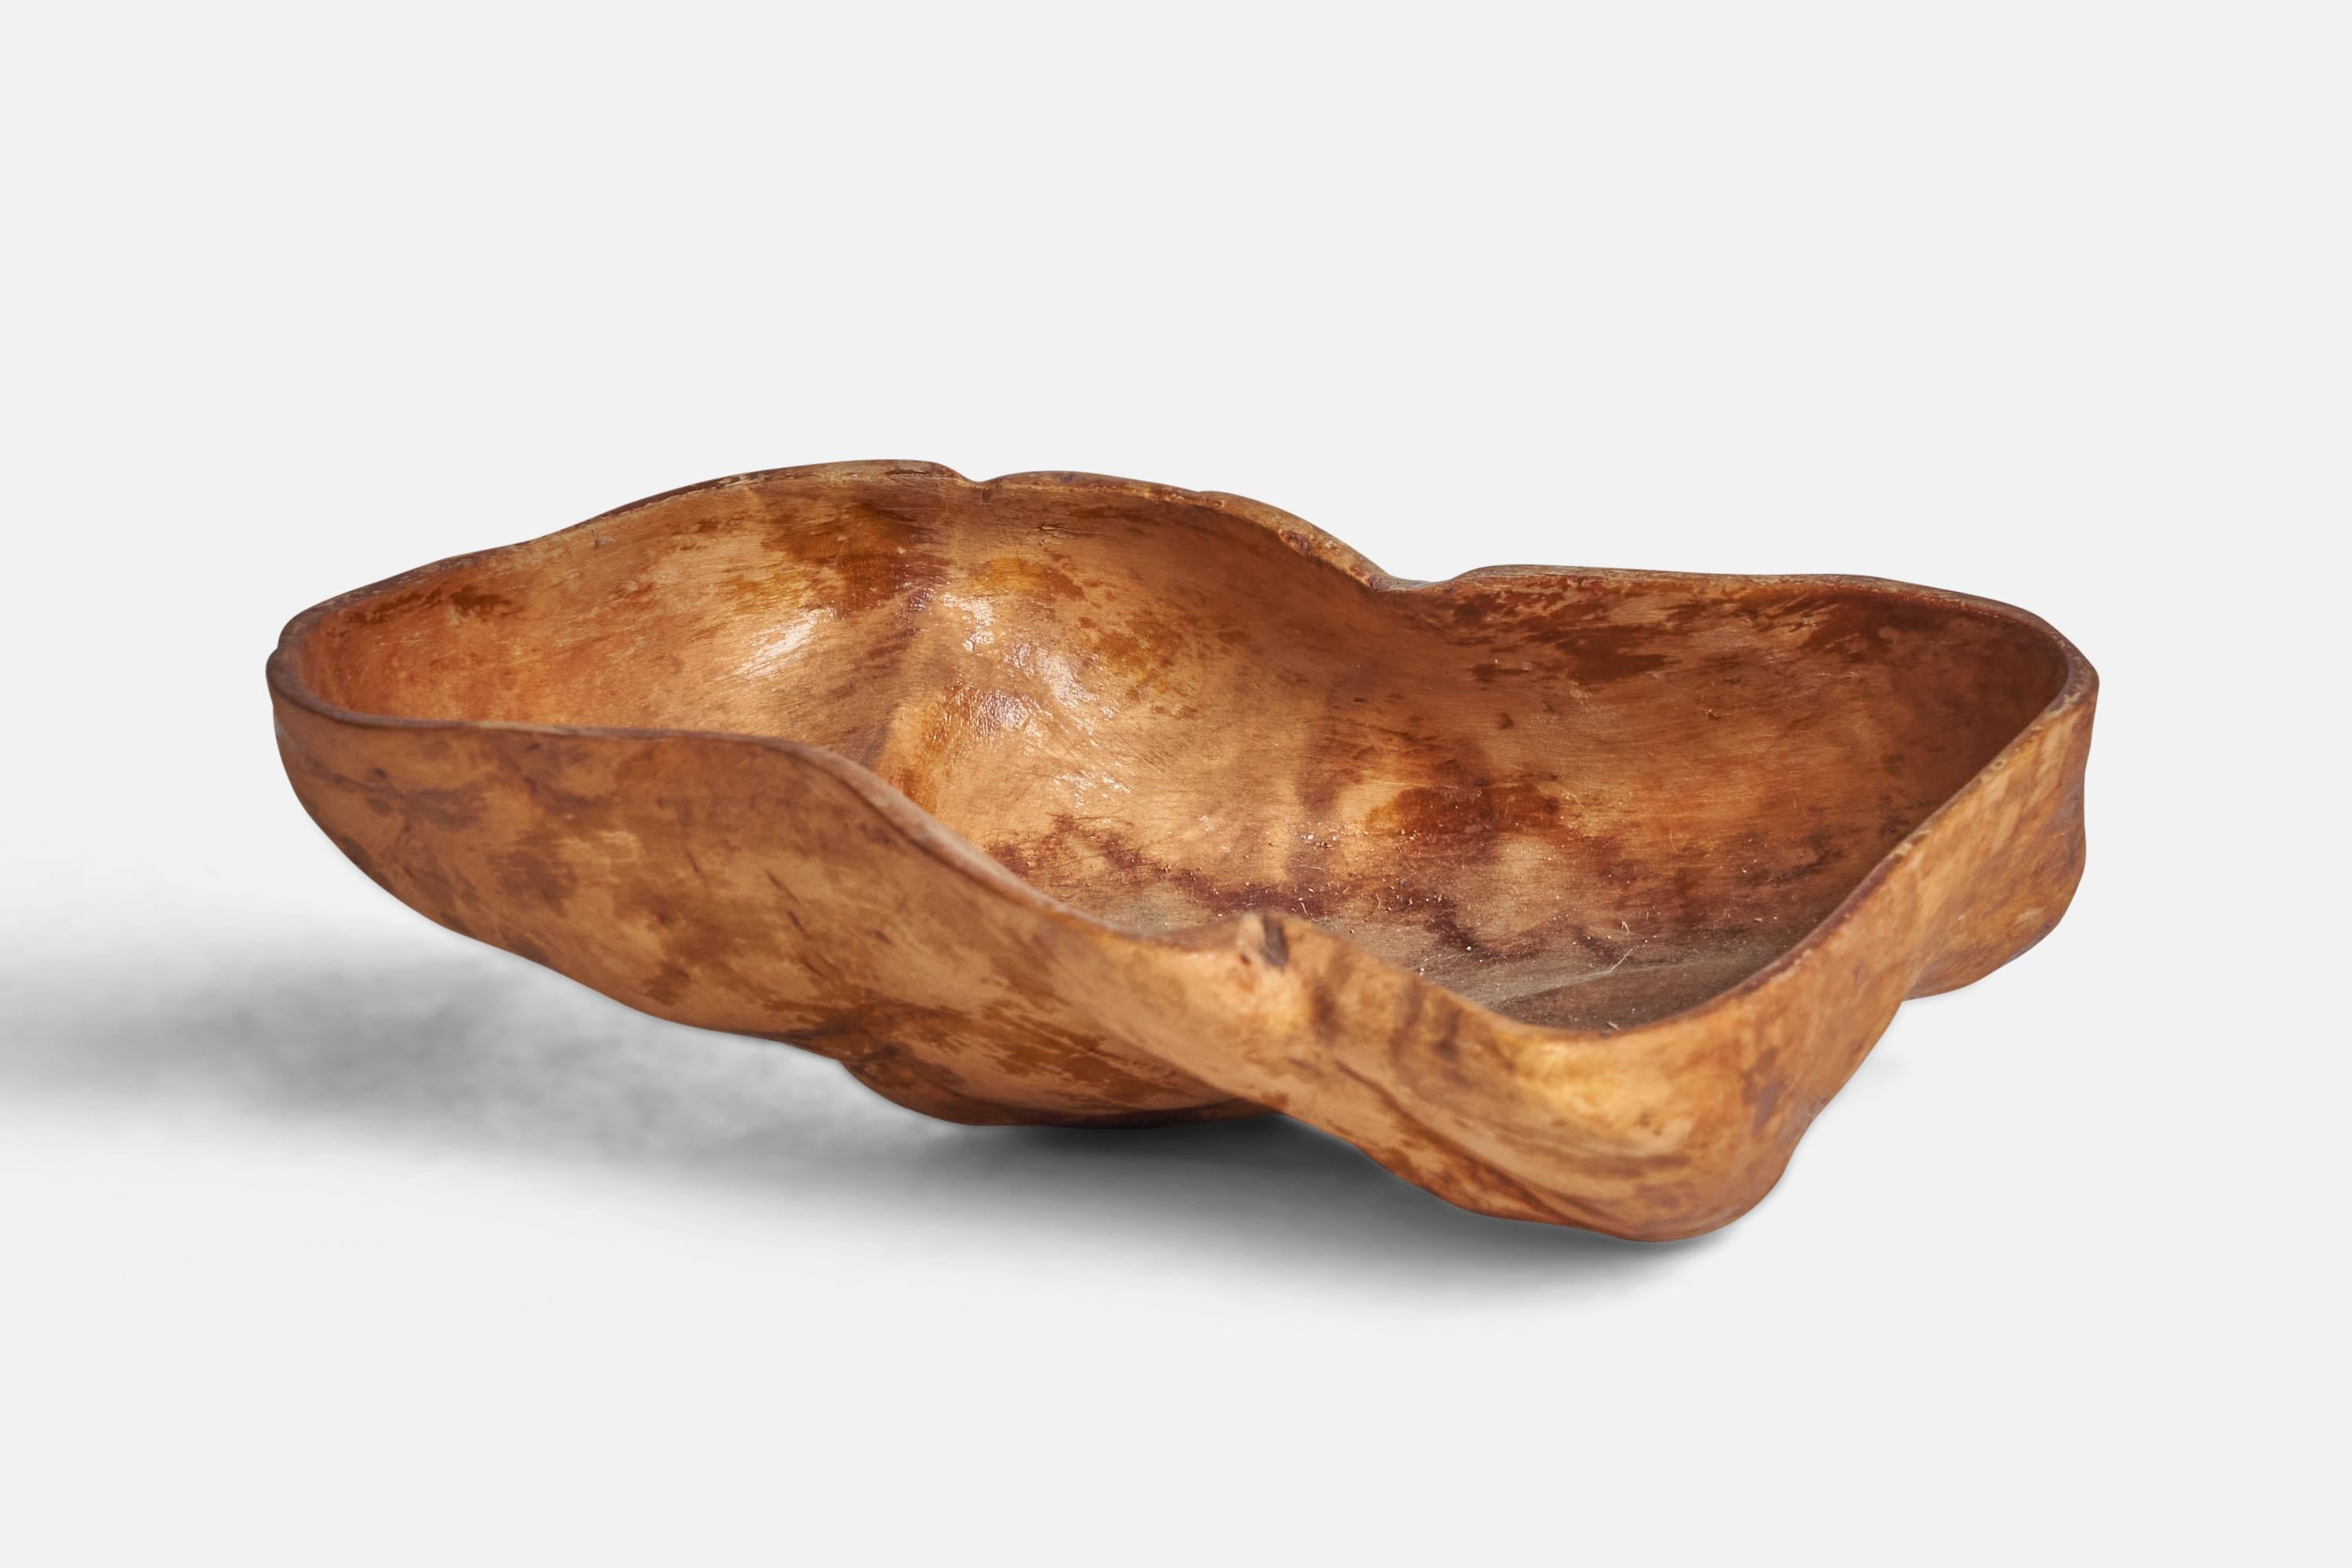 A small burl wood bowl designed and produced in Sweden, c. 1960s.